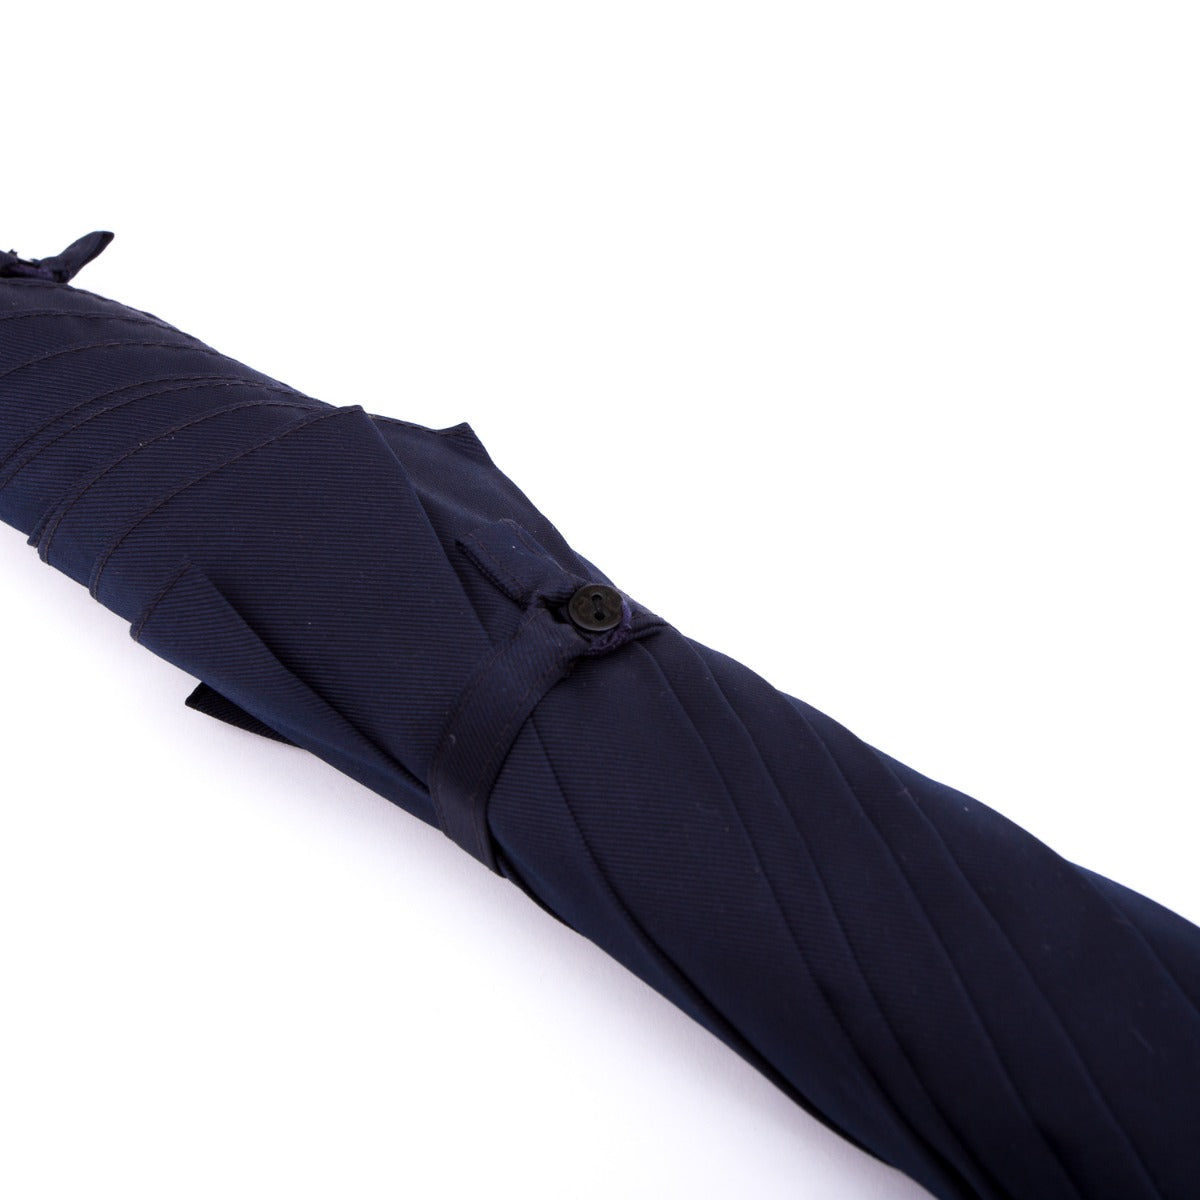 A KirbyAllison.com Ashwood Solid Stick Umbrella with Navy Canopy, with a blue handle on a white background.